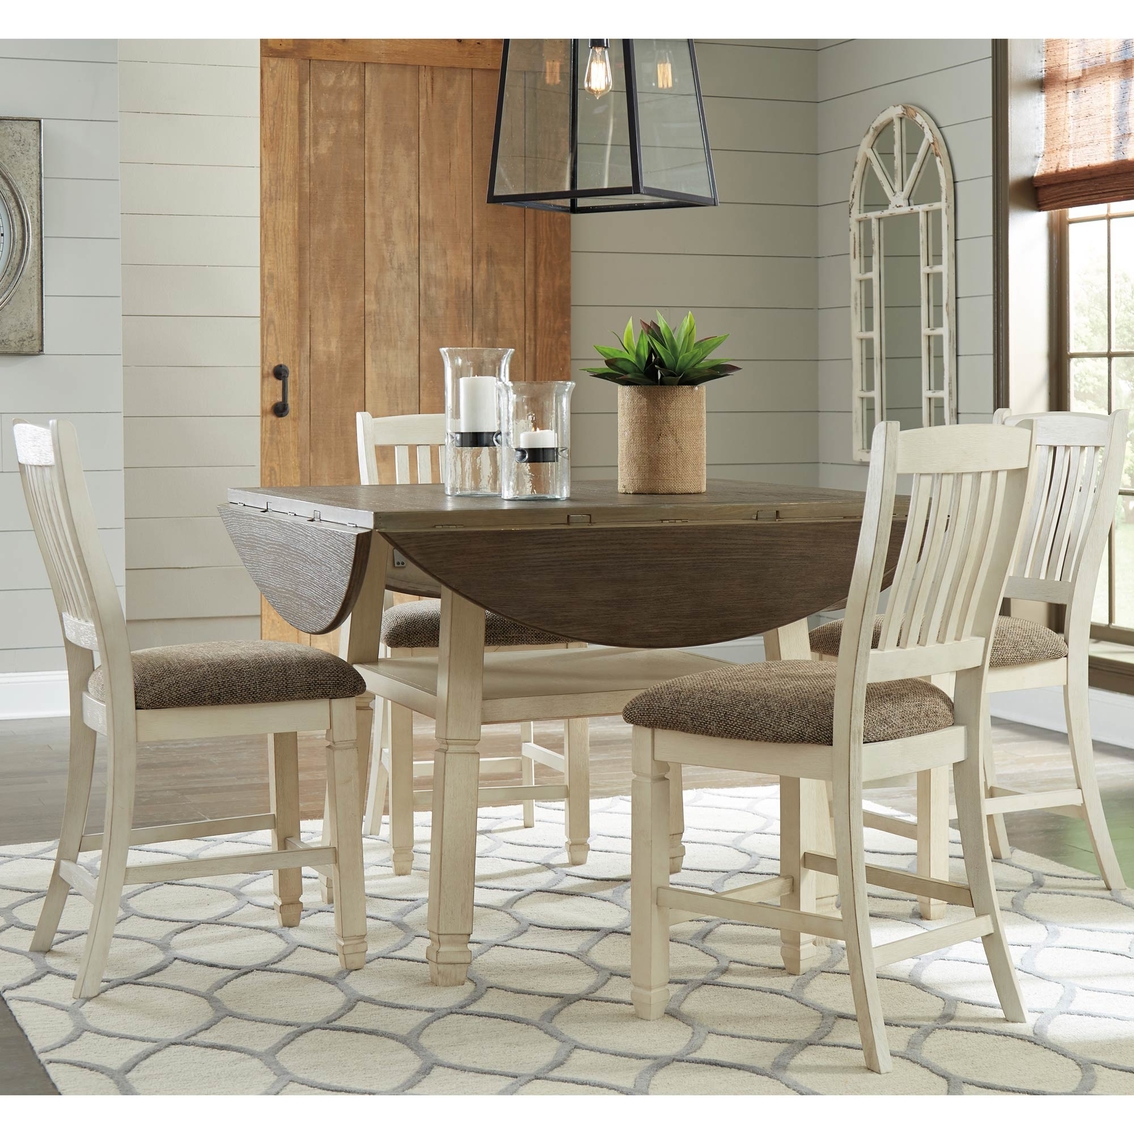 Signature Design by Ashley Bolanburg 5 pc. Drop Leaf Counter Table Set - Image 3 of 4